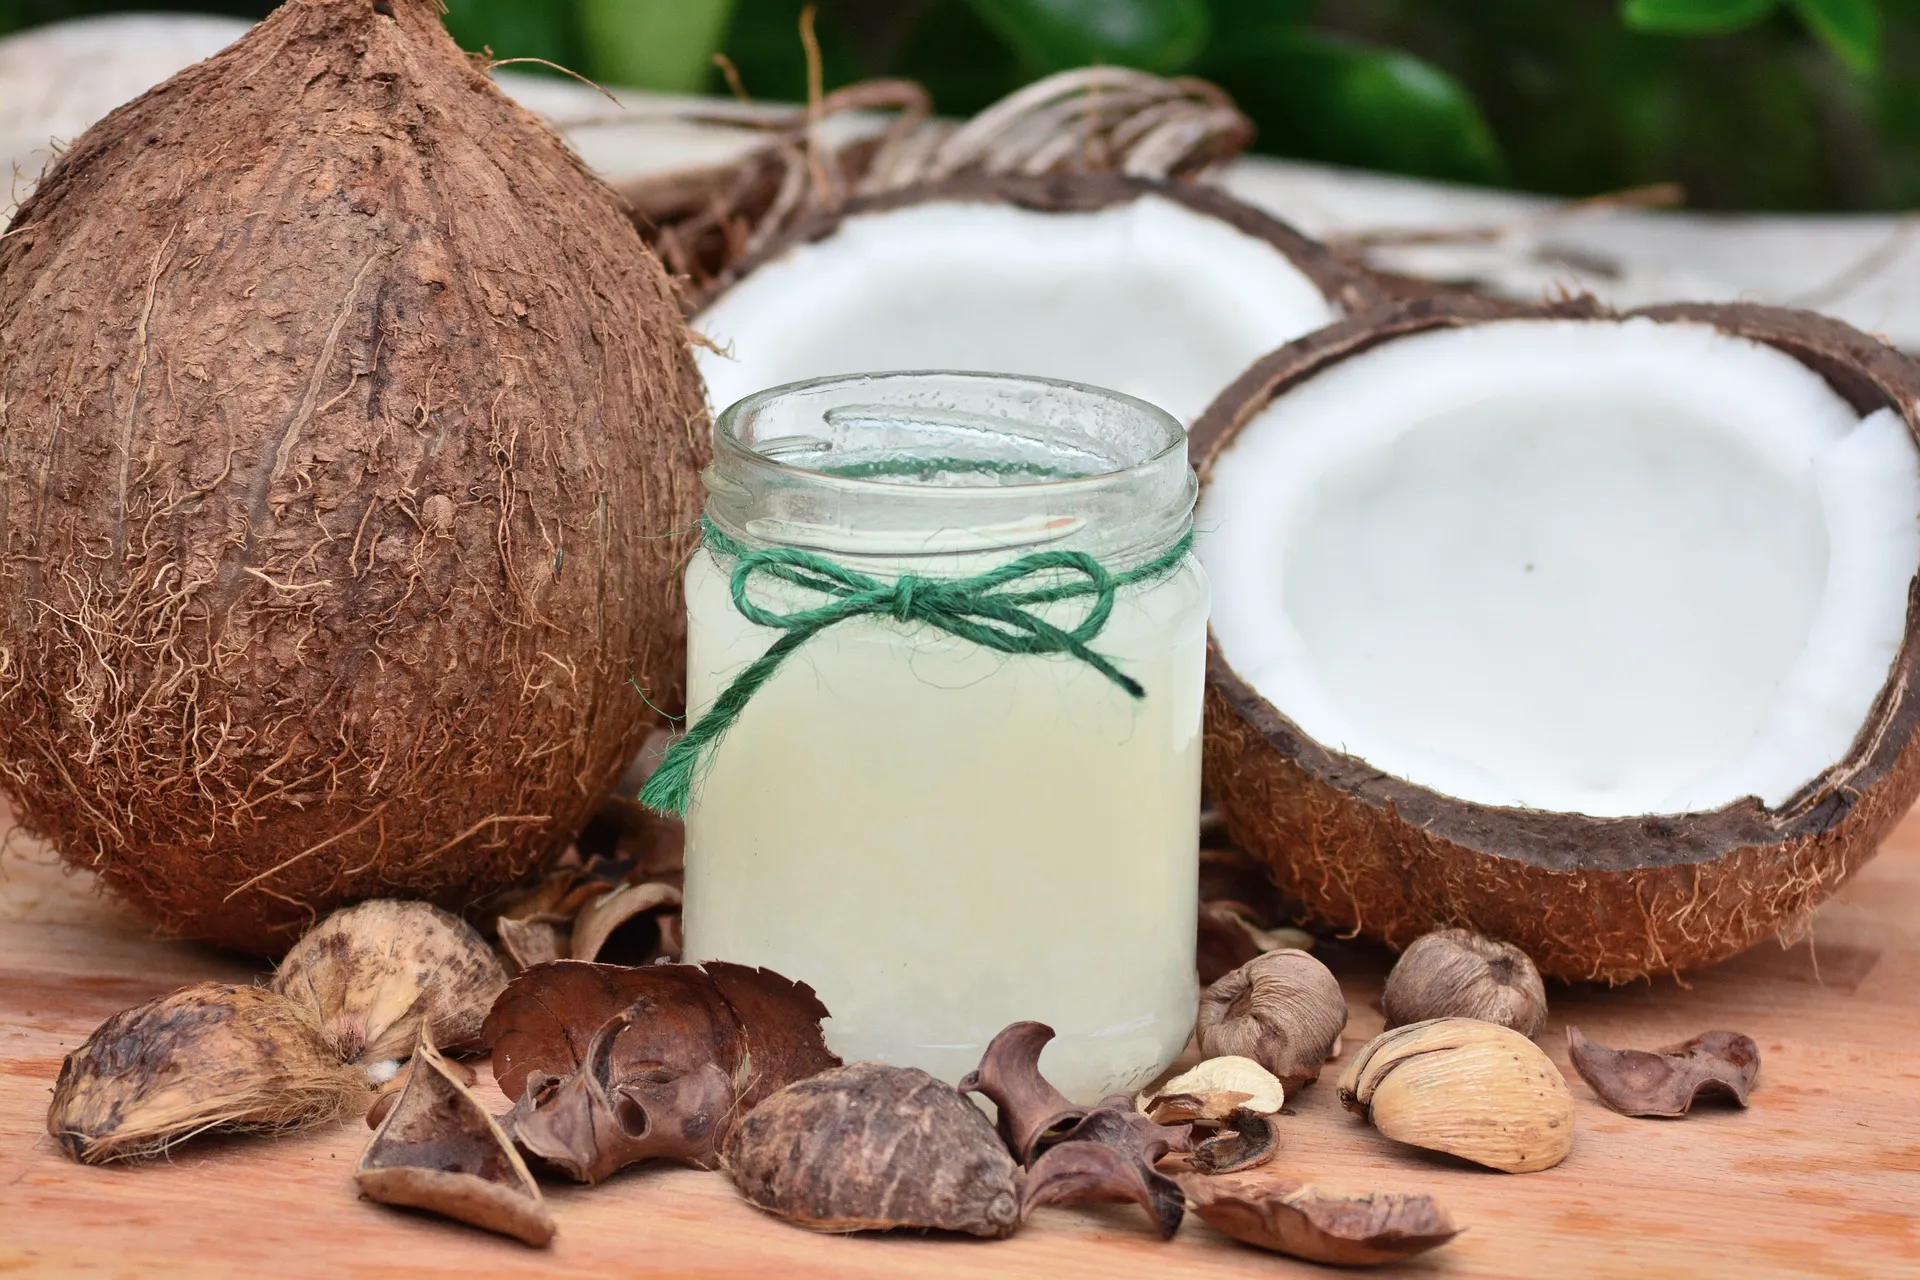 Coconut oil is saturated fat from the plant, which has health benefits and a high smoking point.